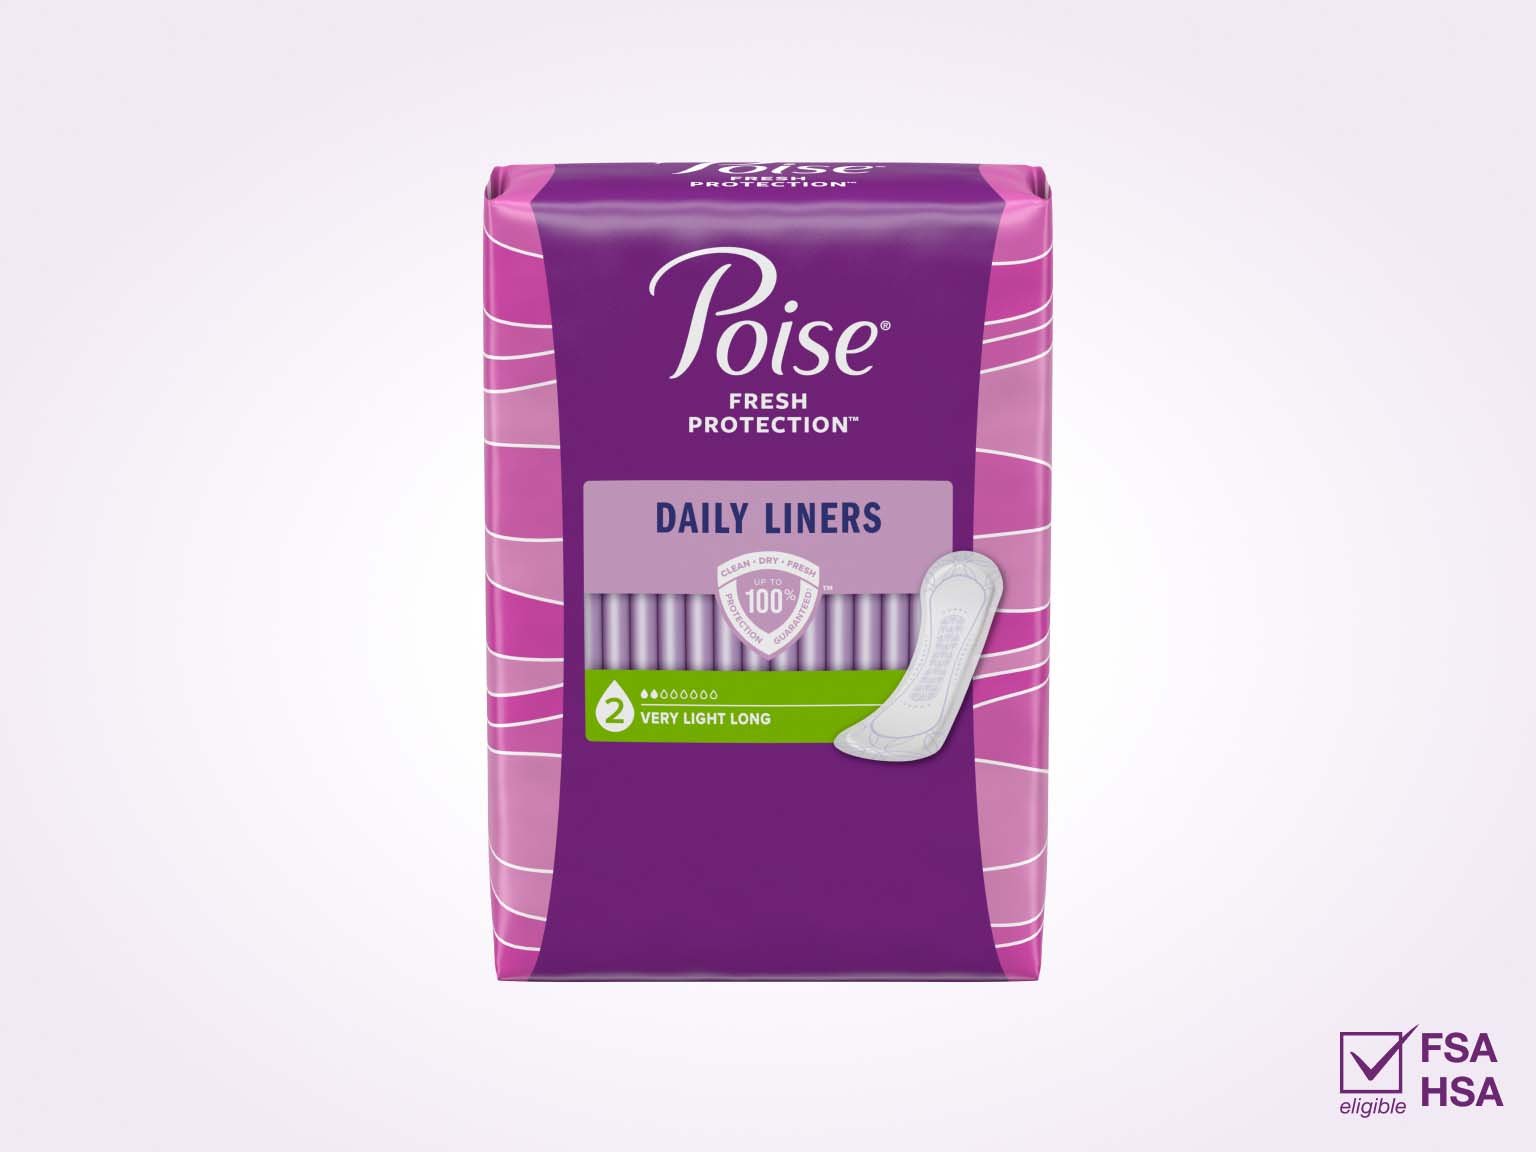 Poise Liners Extra Long Carton 6 x 22's